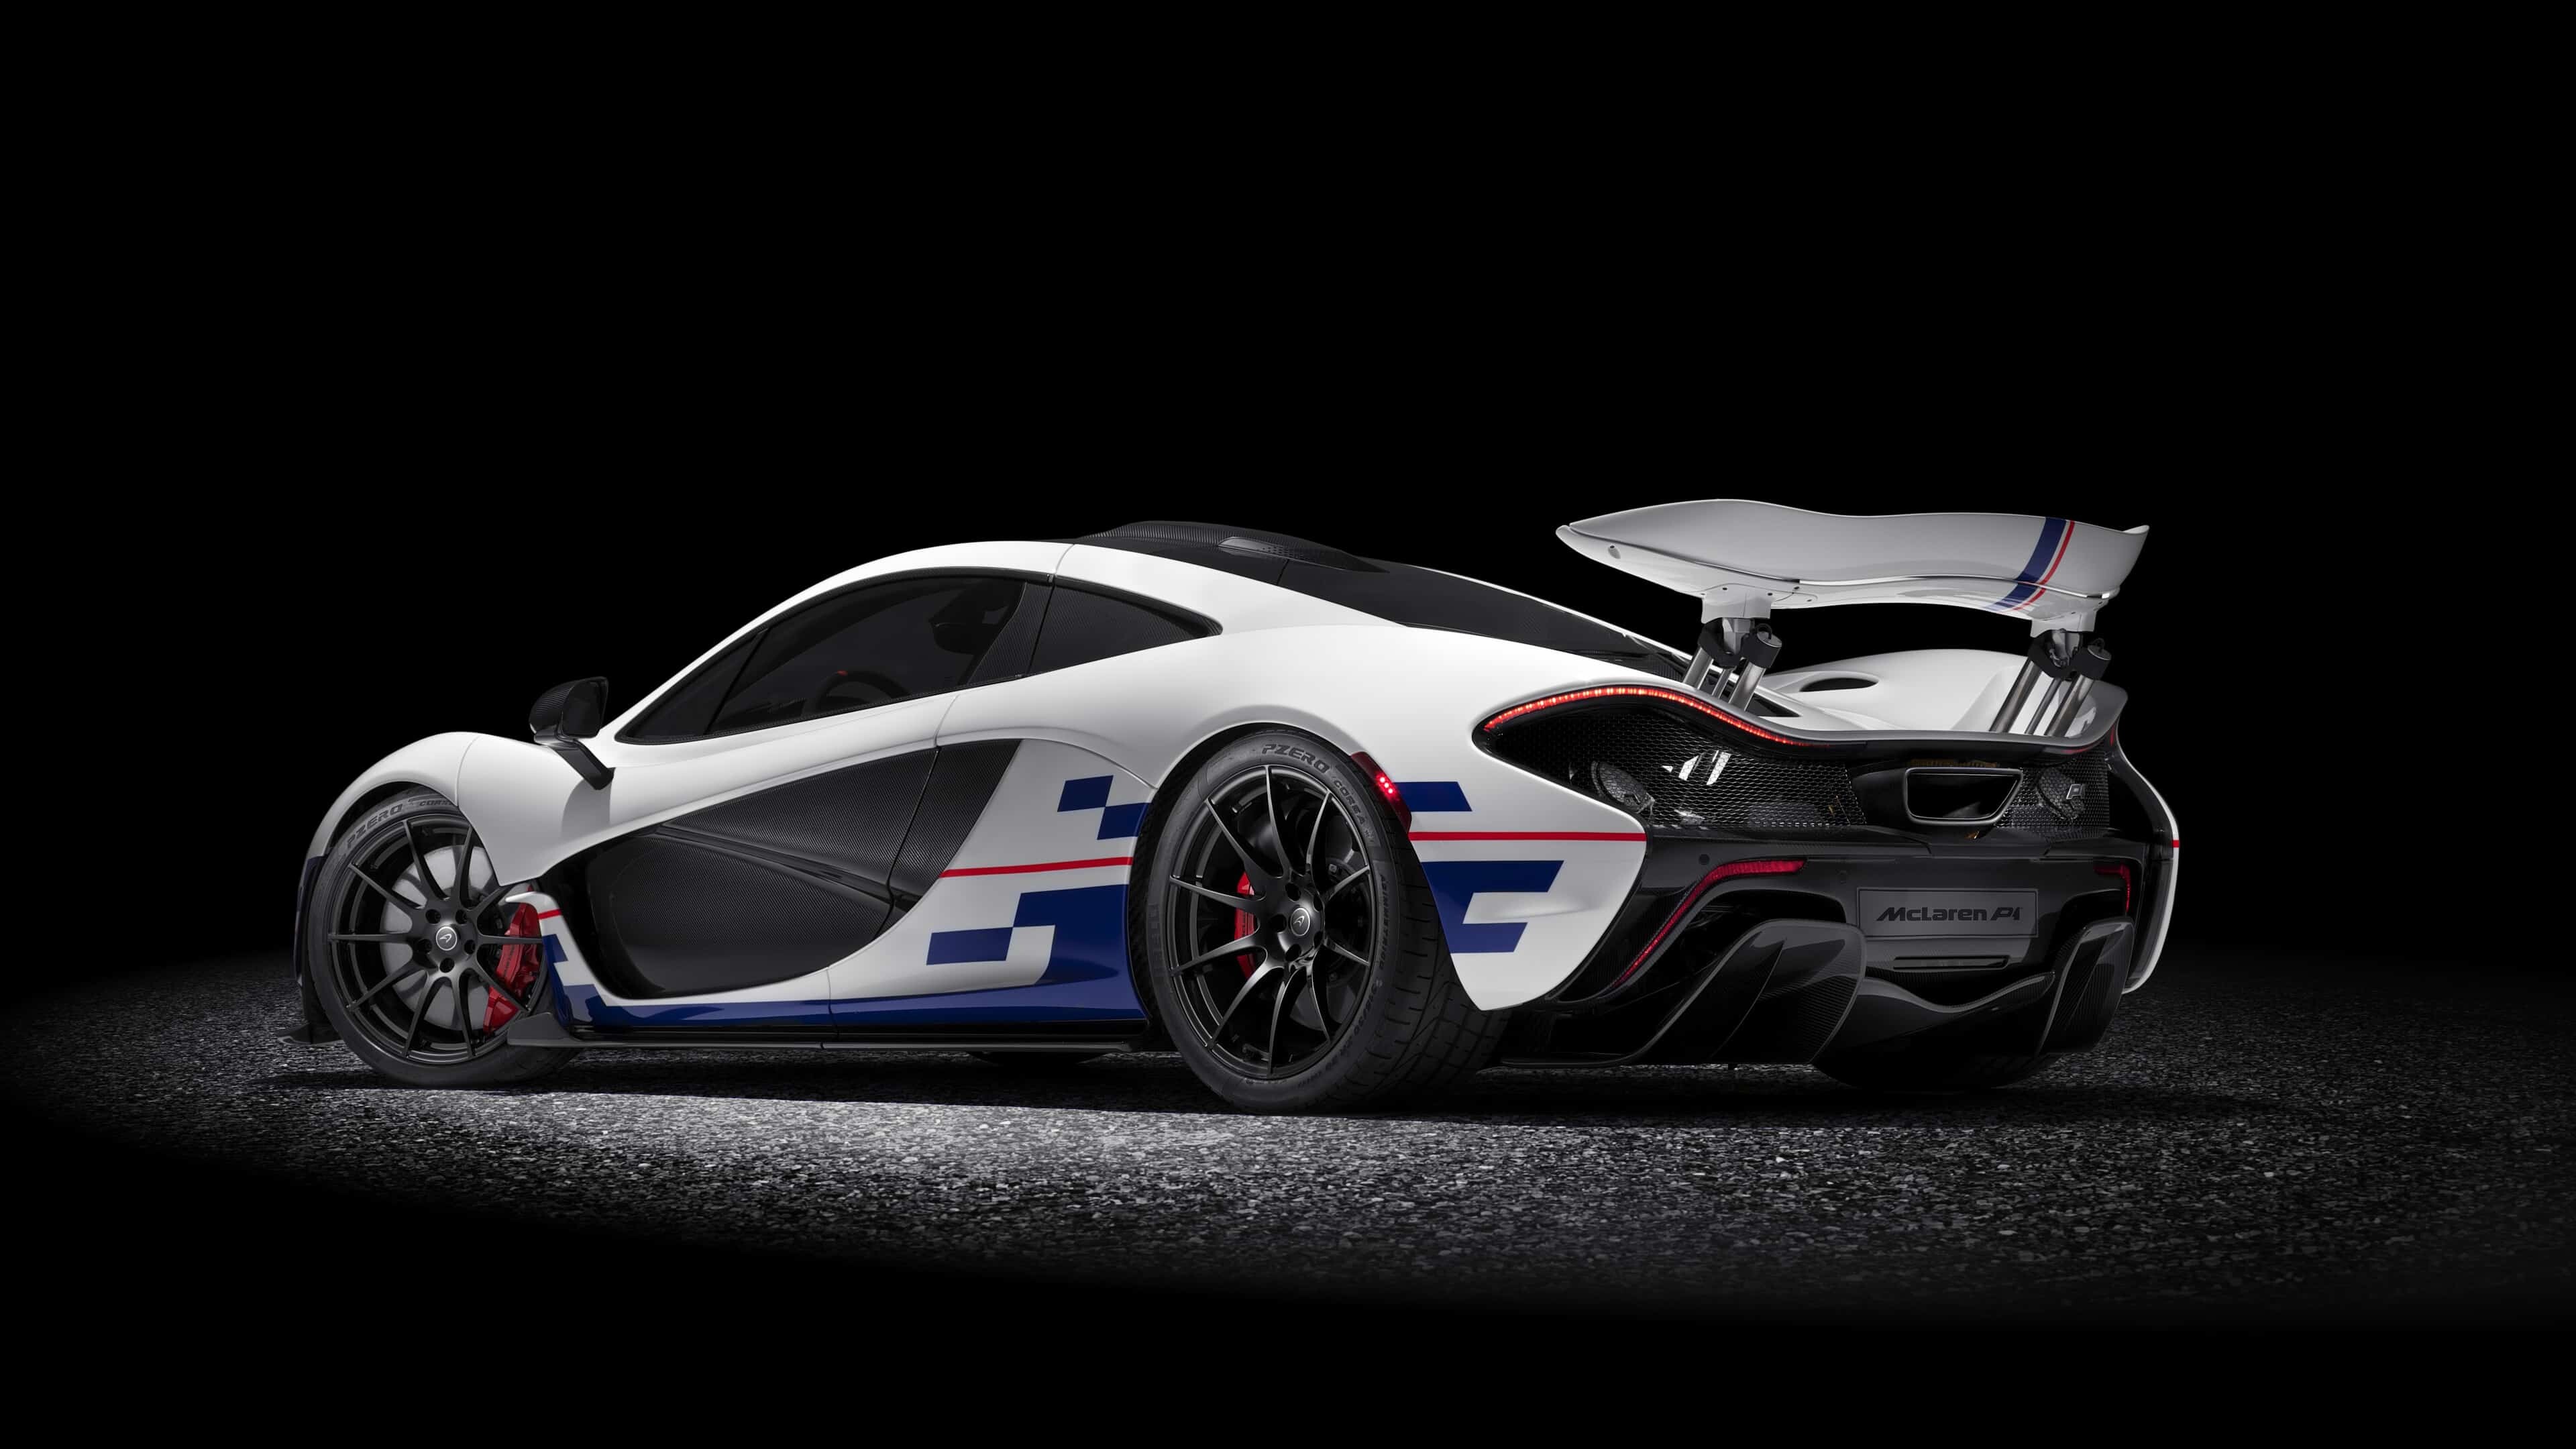 McLaren: A limited-production mid-engine plug-in hybrid sports car, P1. 3840x2160 4K Wallpaper.